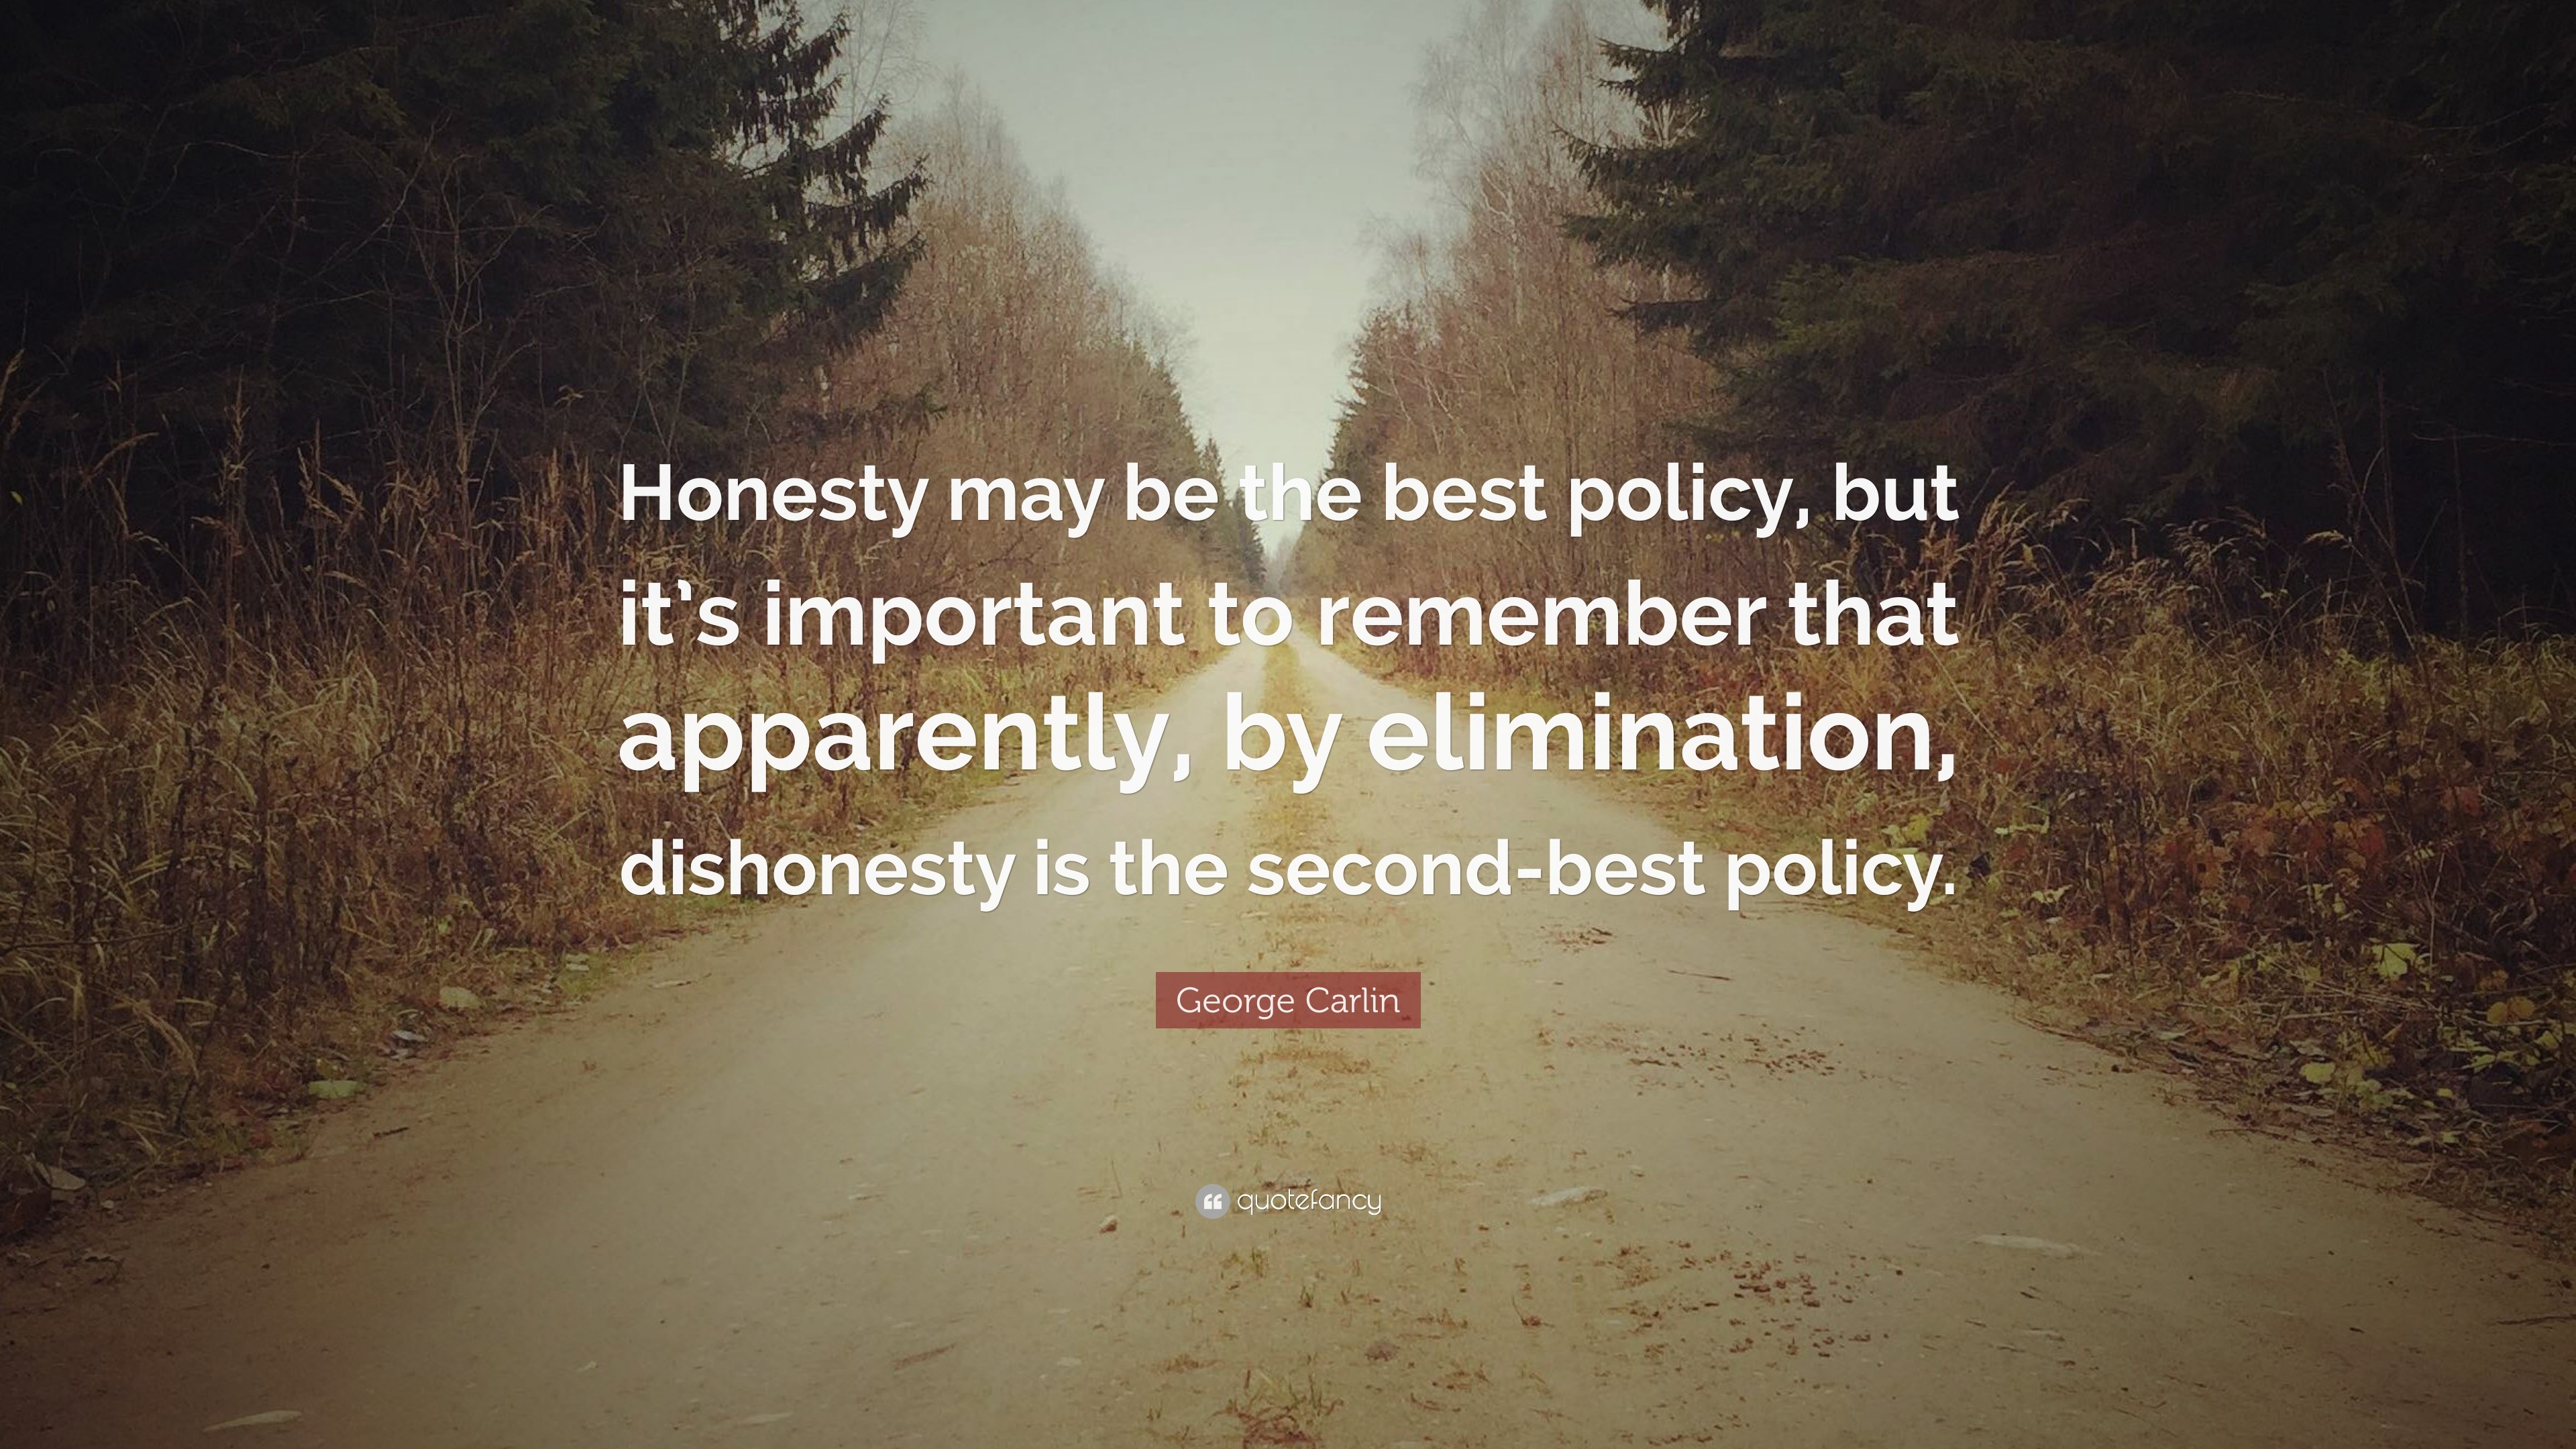 George Carlin Quote: “Honesty may be the best policy, but it’s